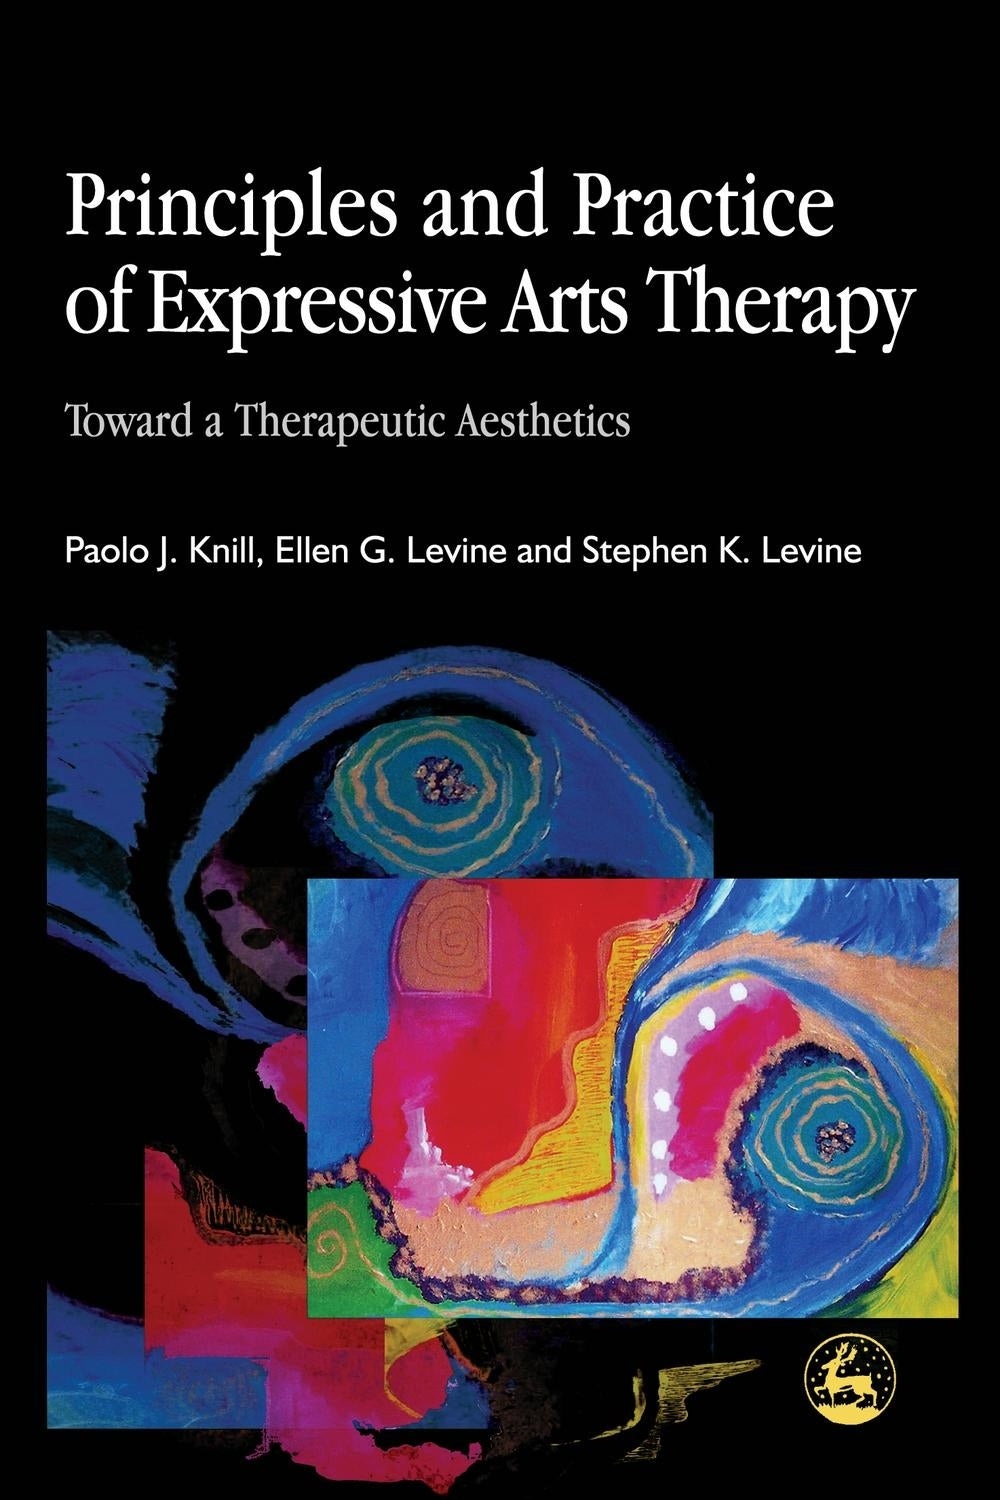 Principles and Practice of Expressive Arts Therapy by Paolo J. Knill, Stephen K. Levine, Ellen G. Levine